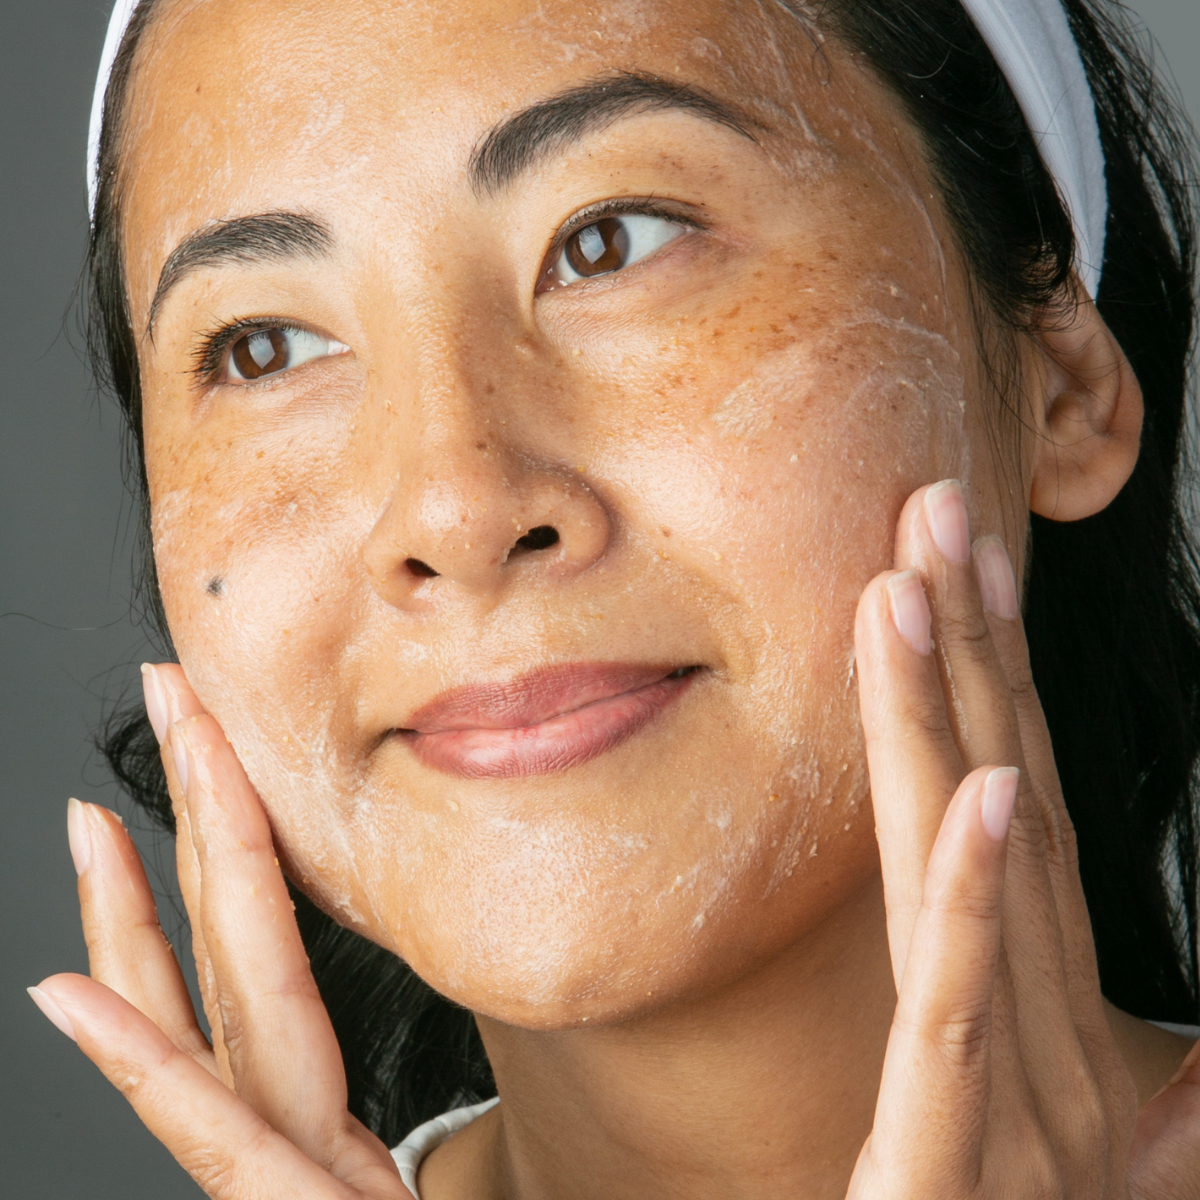 TOO MUCH OF A GOOD THING: WHAT TO DO IF YOU’VE OVER-EXFOLIATED: a woman applying scrub to her cheeks and smiling